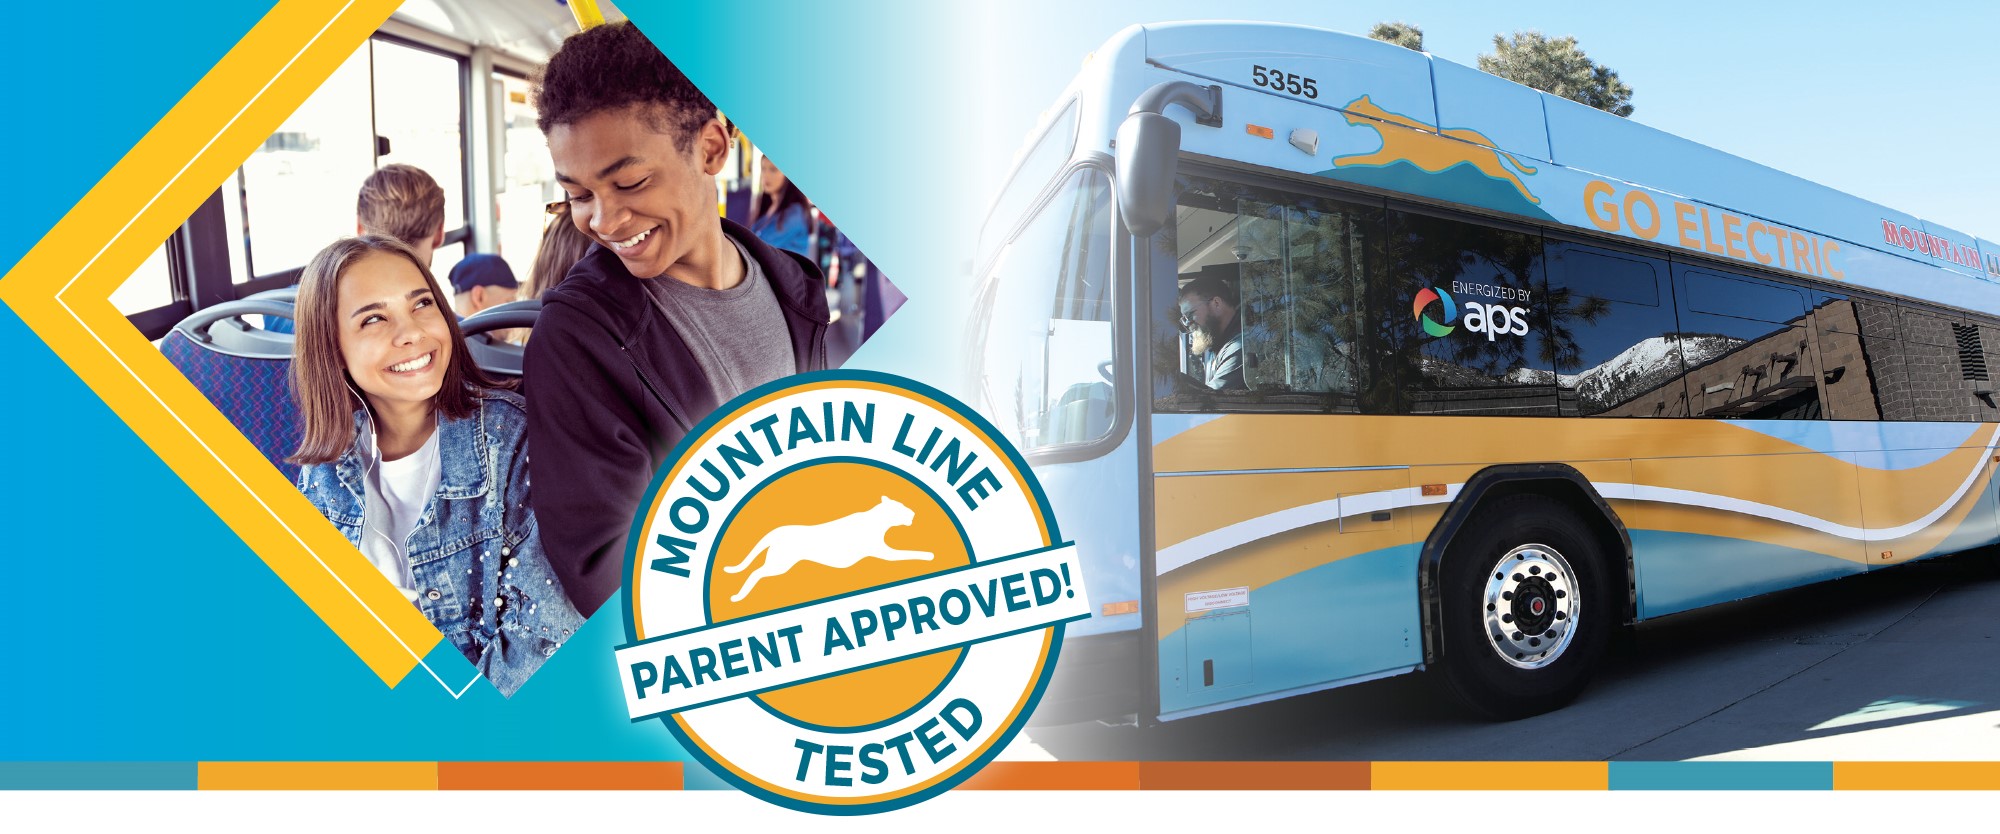 Two young kids sitting on a bus with the catch phrase Mountain Line Tested, Parent Approved!